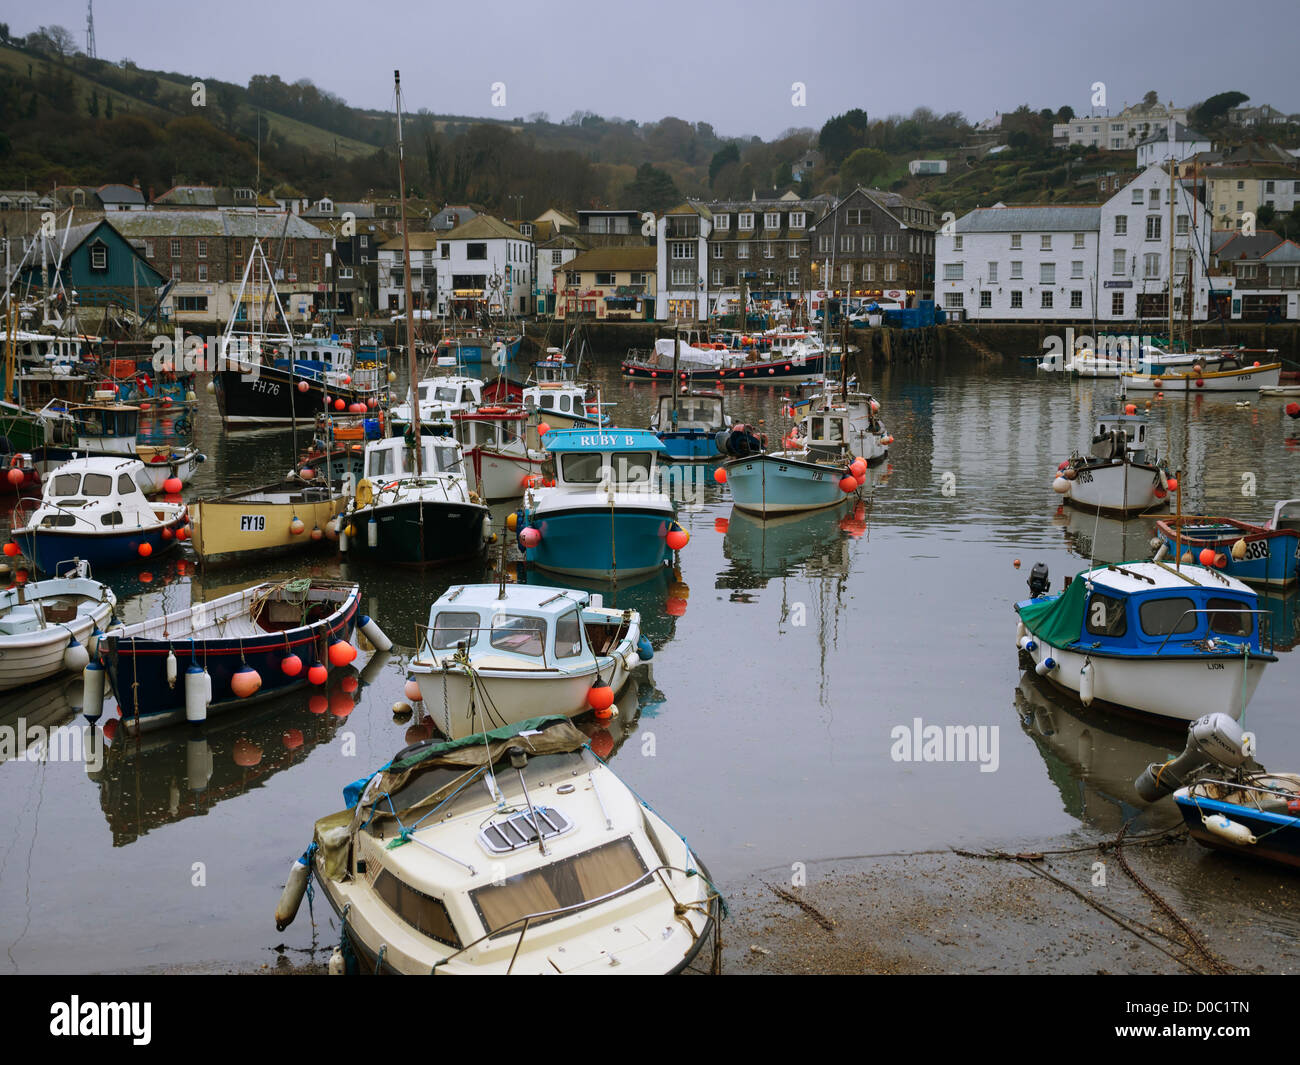 Mevagissey, Cornwall. The inner harbour at dusk of the picturesque fishing village on the south Cornish coast. Stock Photo